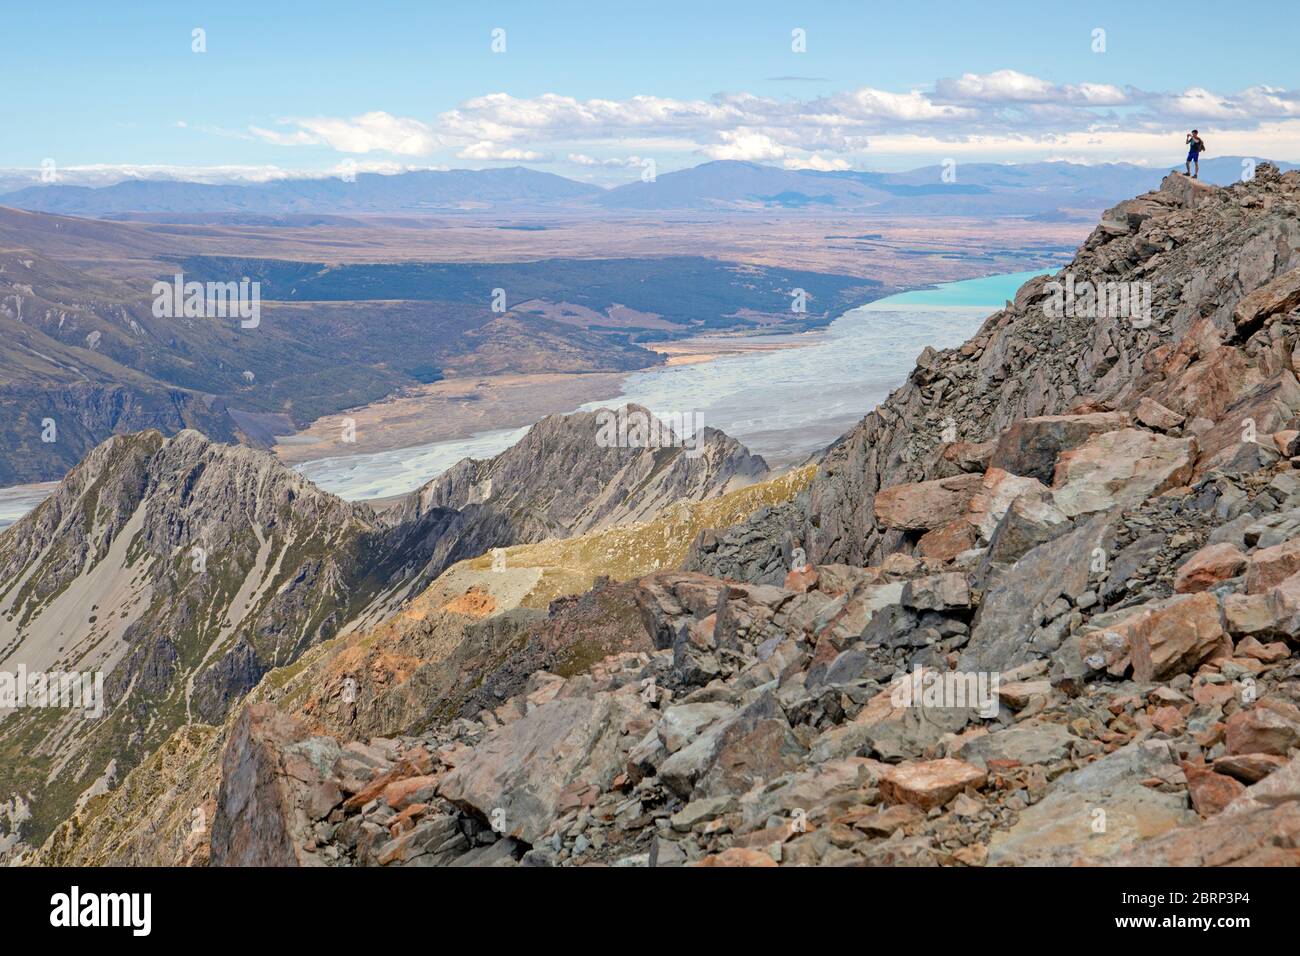 Person on the summit of Mt Ollivier, looking out to Lake Pukaki Stock Photo